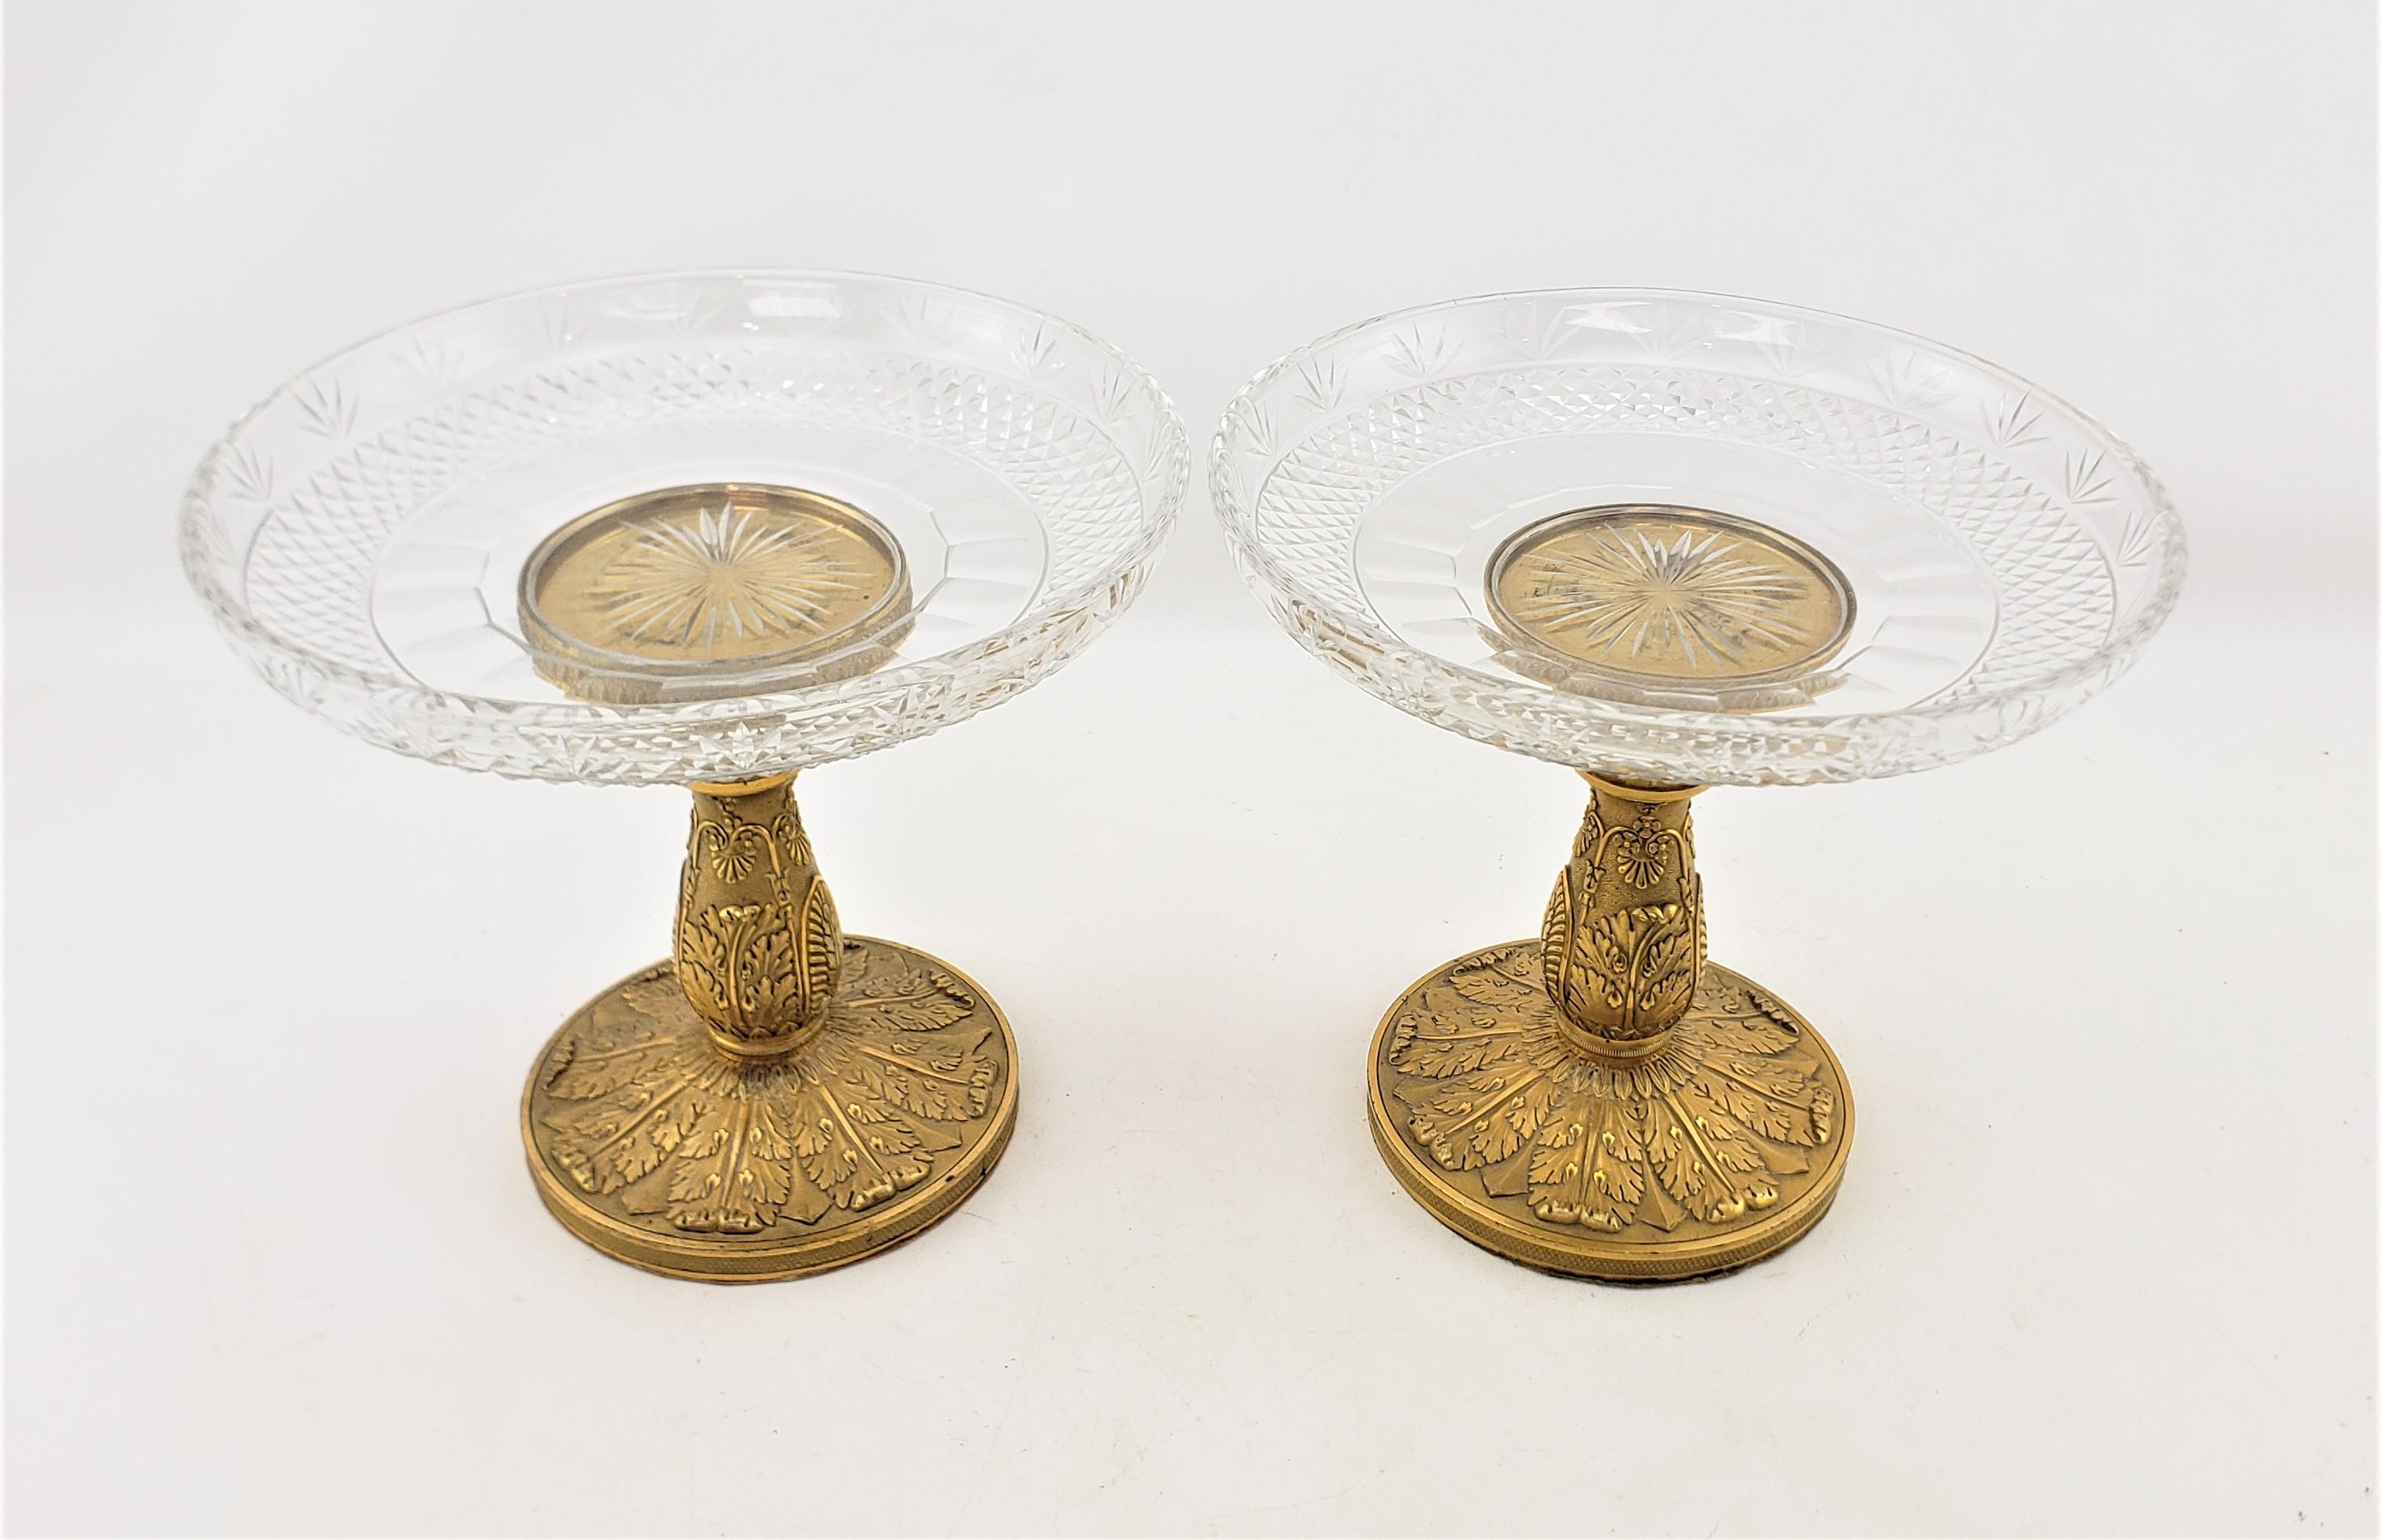 Pair of Antique Gilt Bronze & Crystal Tazzas or Pedestal Bowls For Sale 3